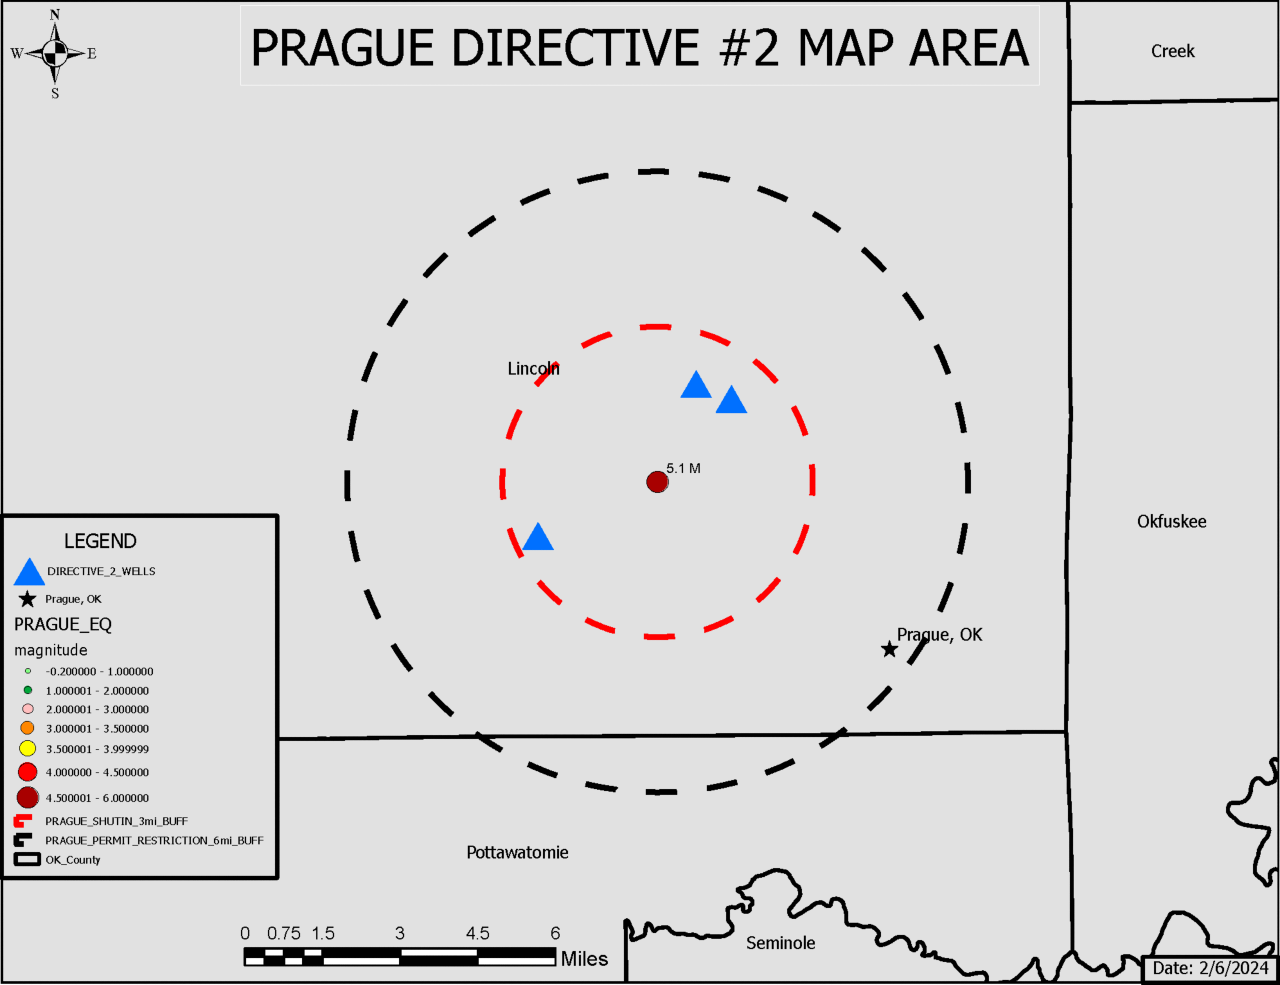 Epicenter of 5.1 earthquake in Prague showing 3 wells within 3 miles impacted by directive issued February 7